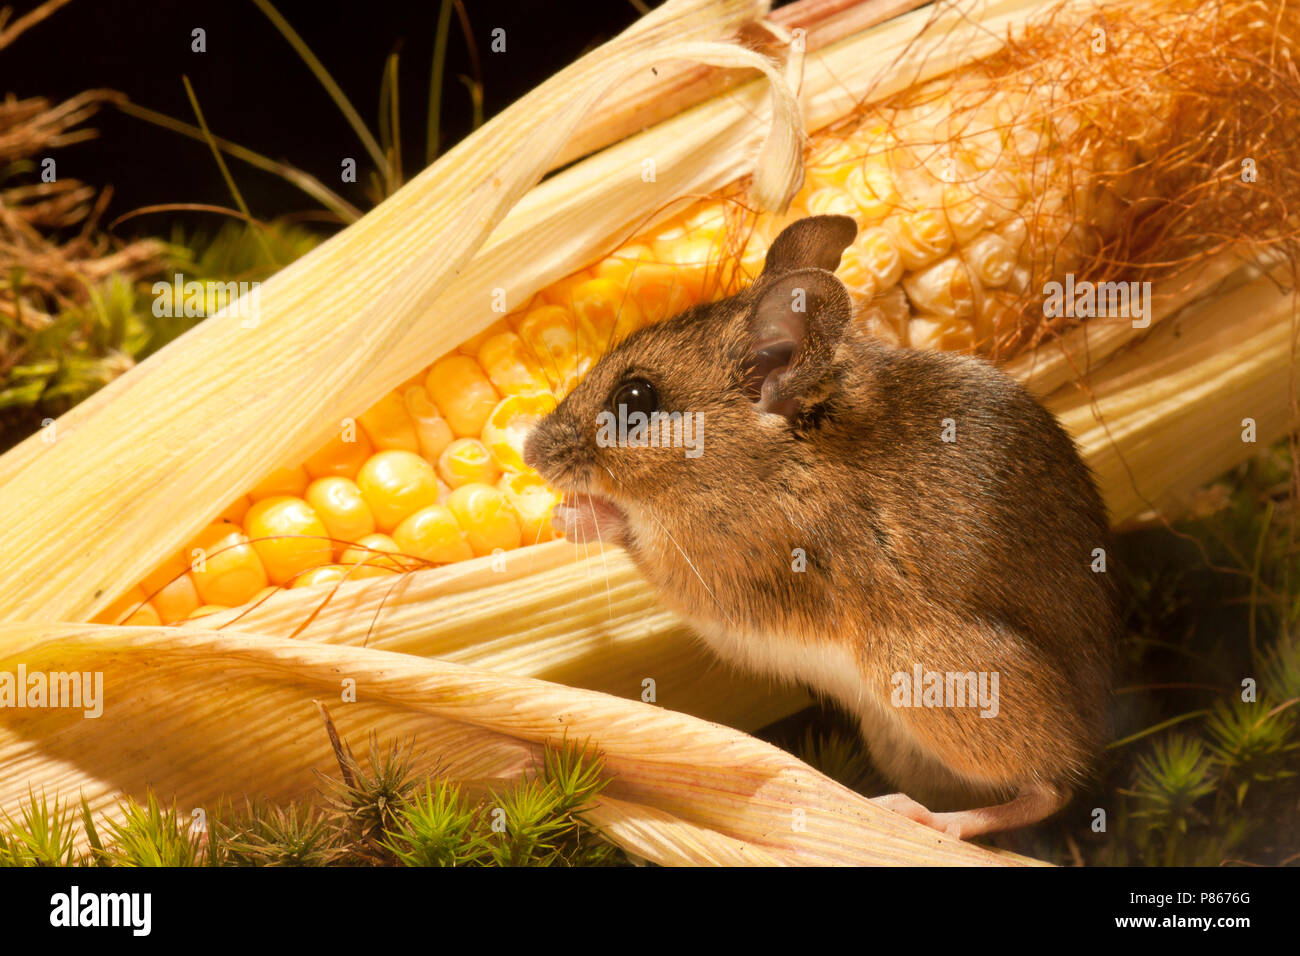 Foeragerende Bosmuis; Foraging Wood Mouse Stock Photo